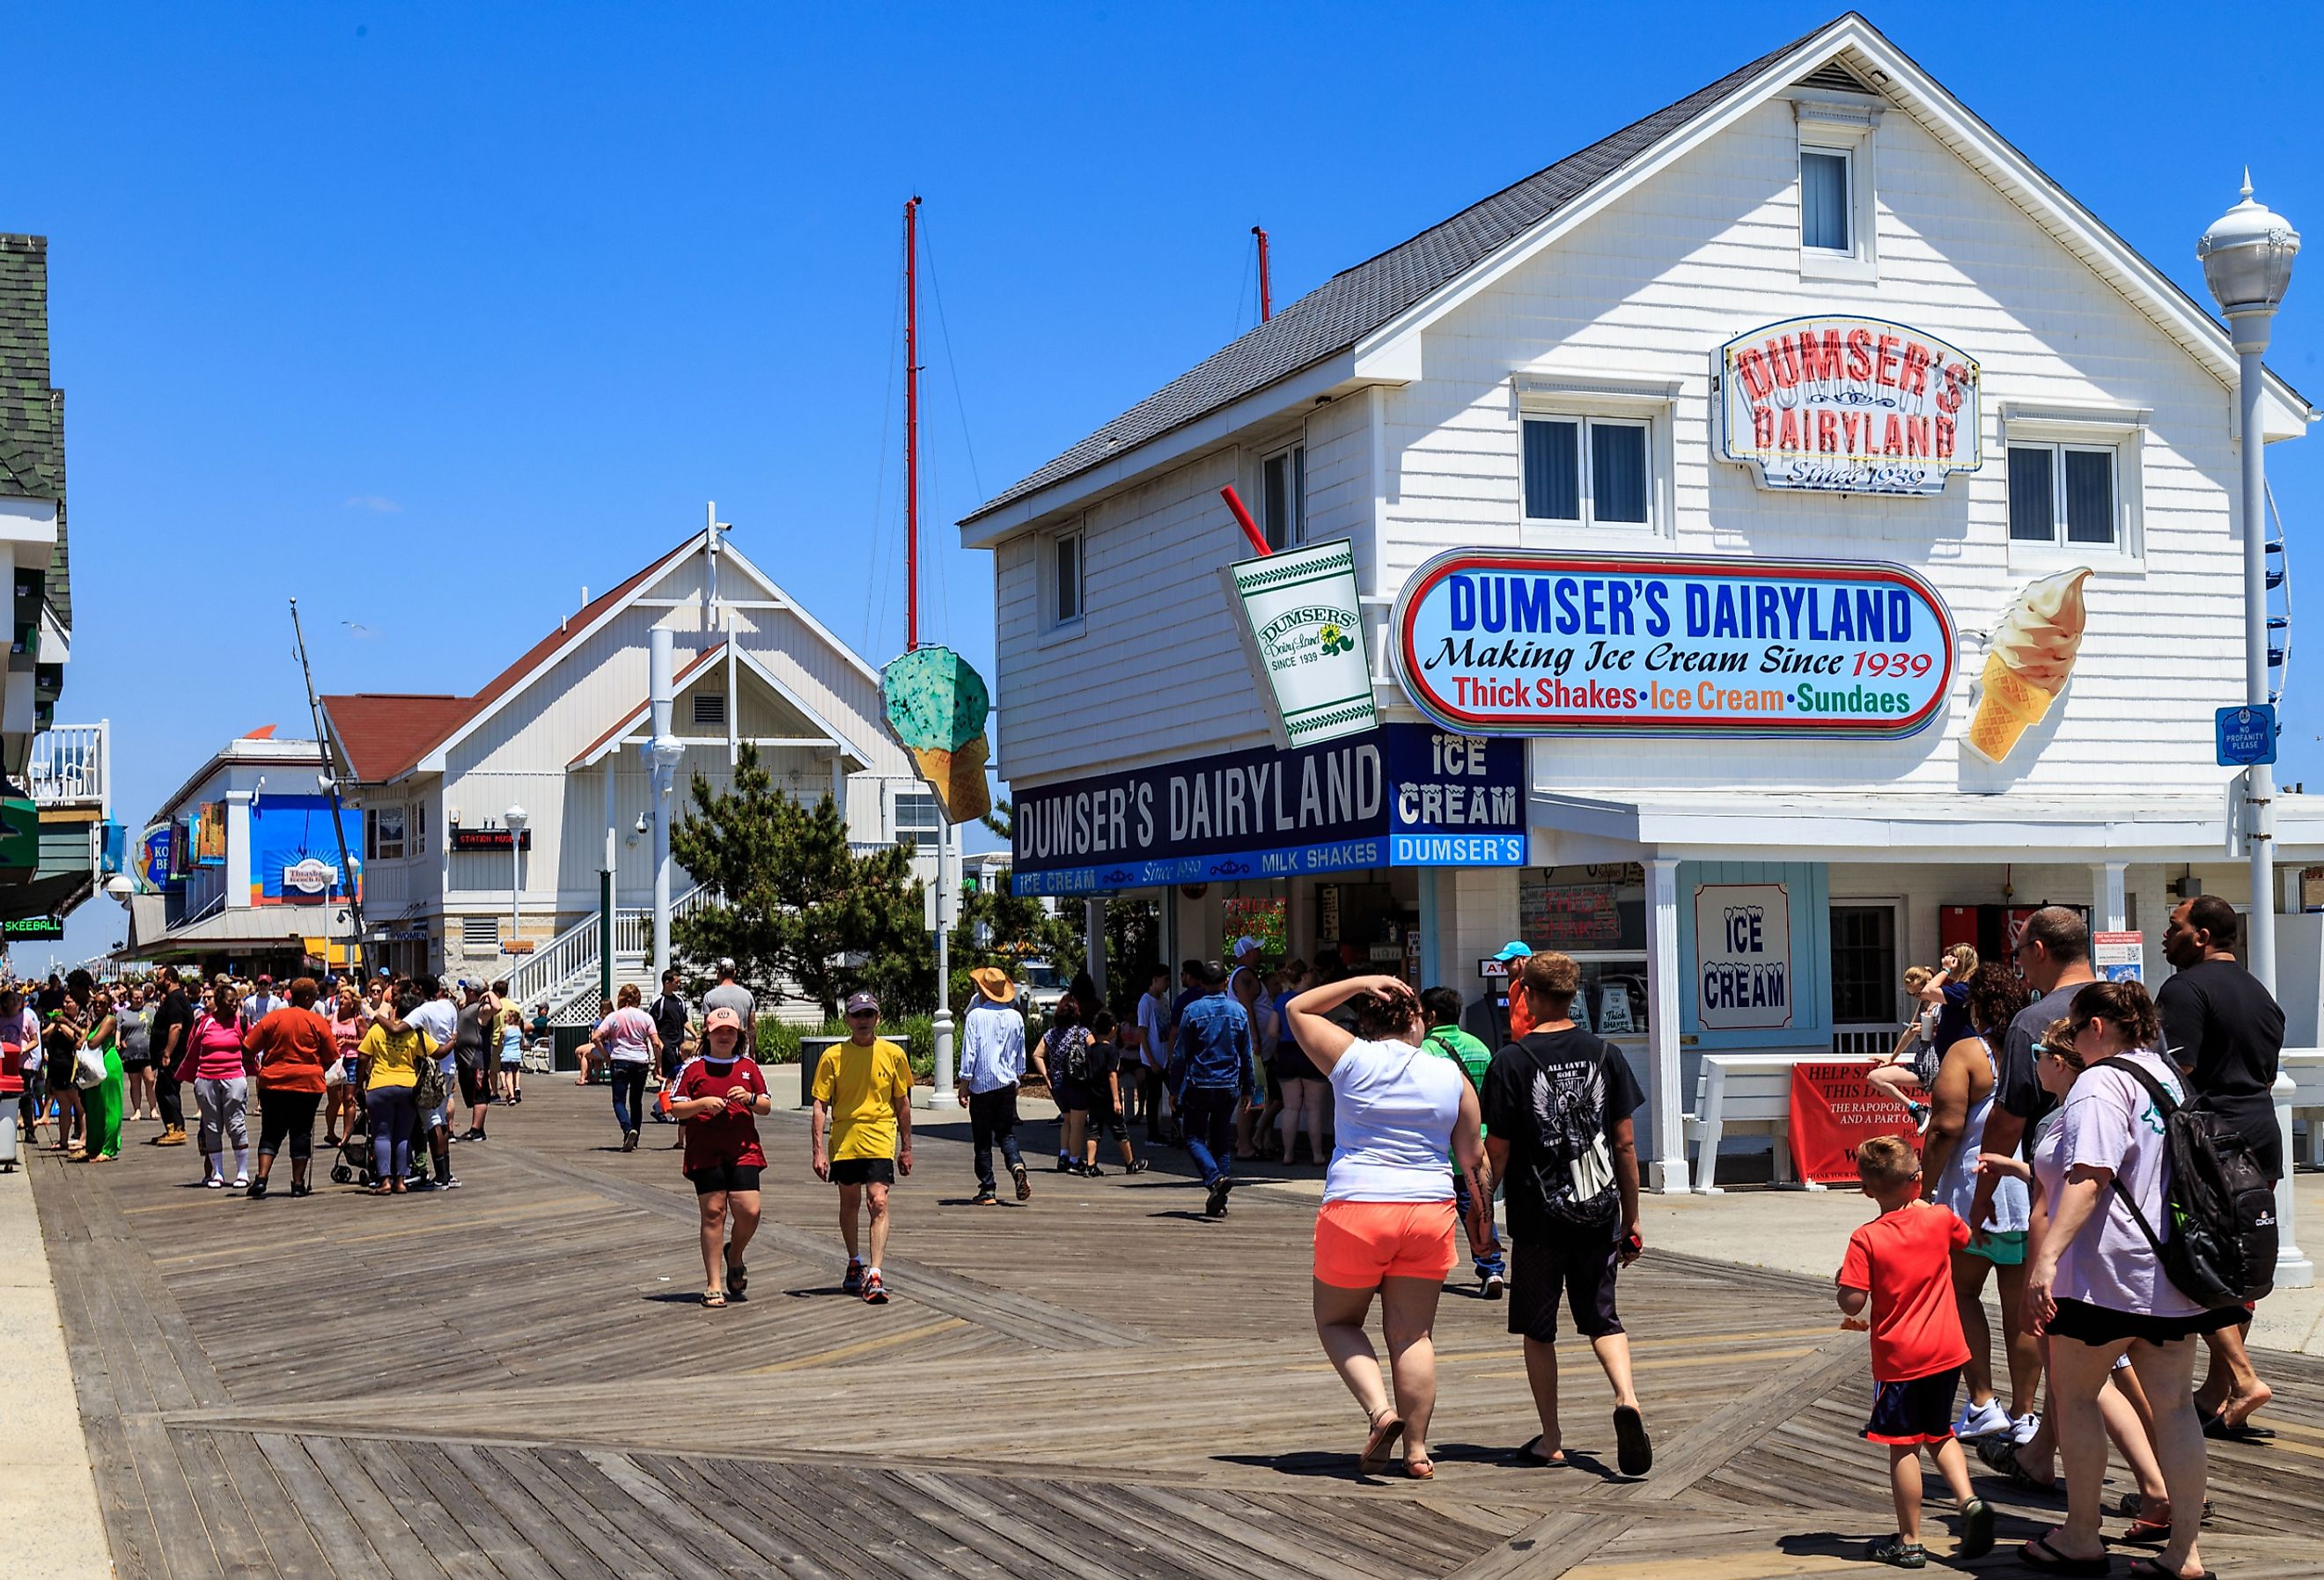 Stores, shops, and eateries attract visitors on the Ocean City boardwalk, Maryland. Image credit George Sheldon via Shutterstock